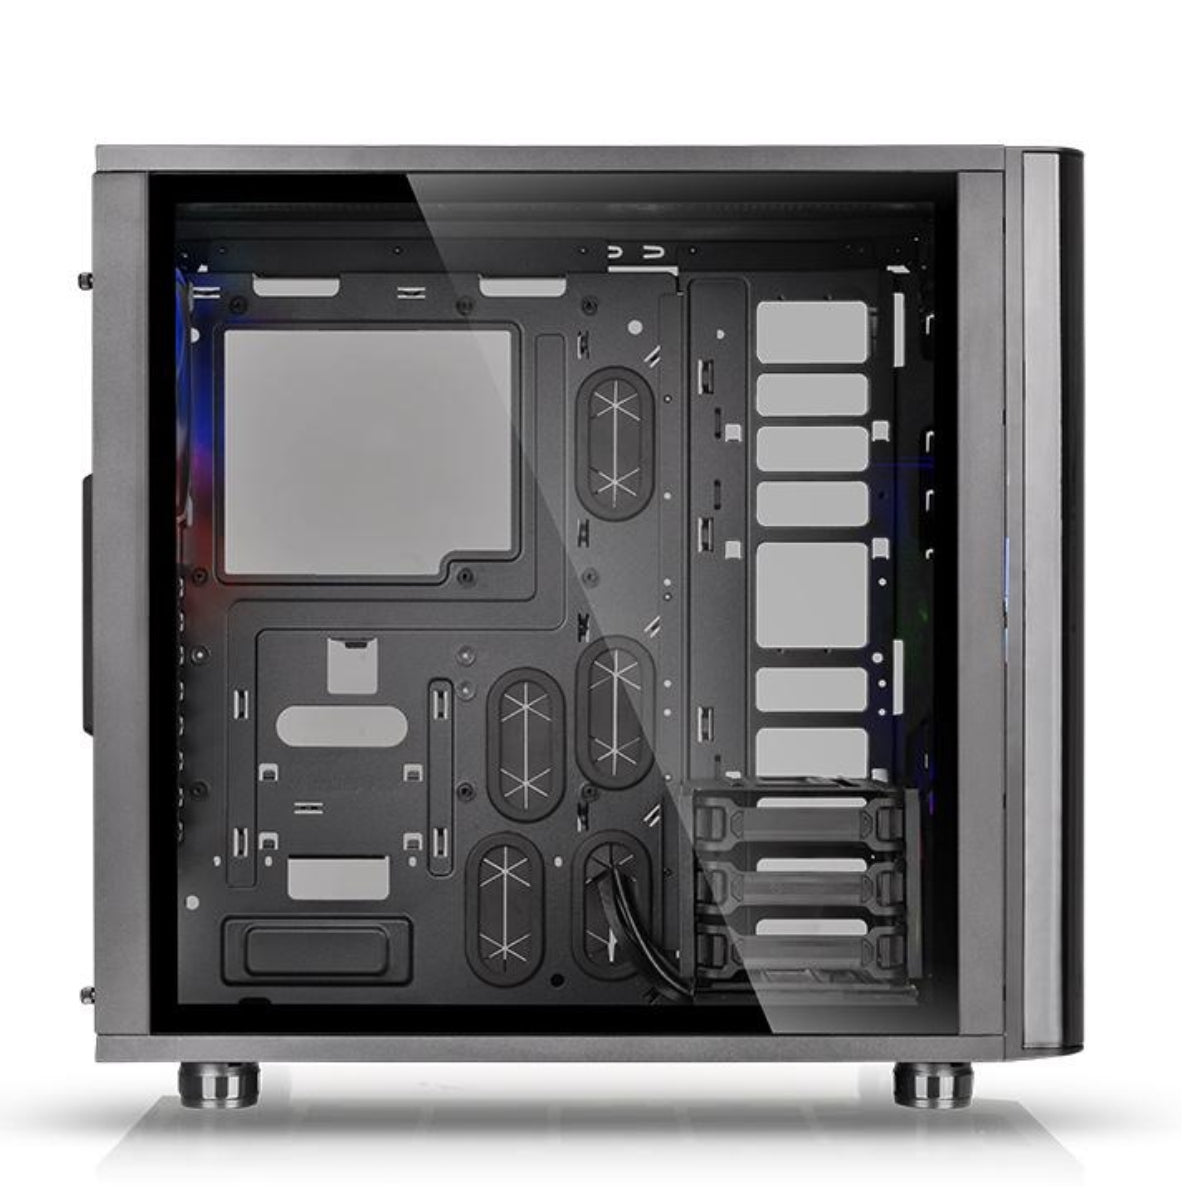 Thermaltake View 31 TG RGB Edition ATX Mid Tower Chassis - صندوق